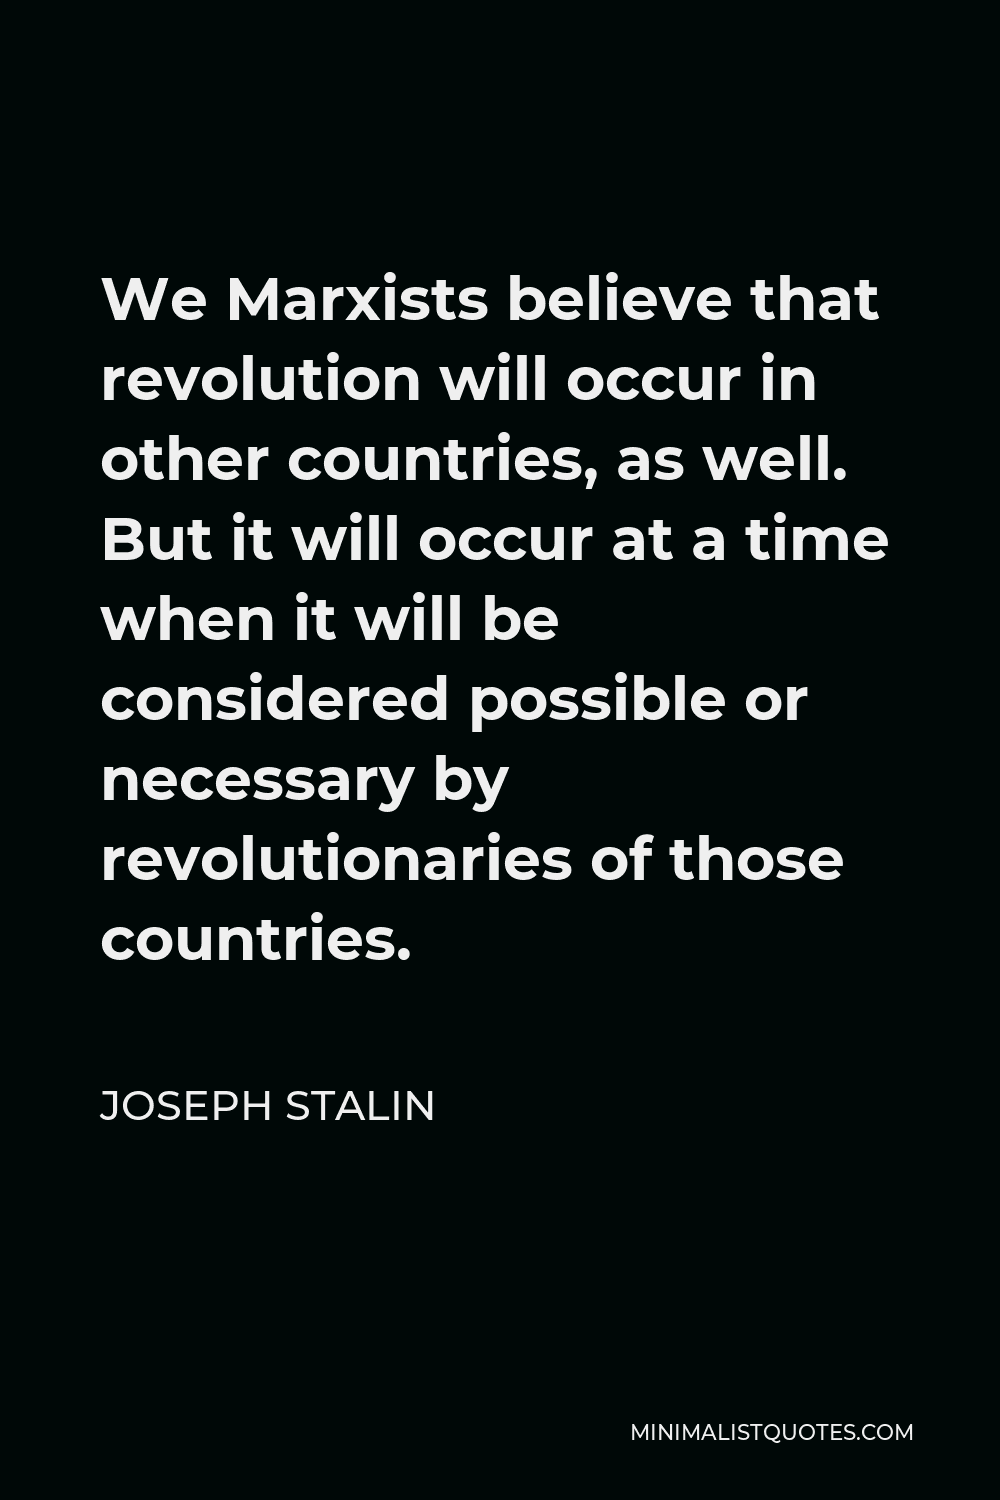 Joseph Stalin Quote - We Marxists believe that revolution will occur in other countries, as well. But it will occur at a time when it will be considered possible or necessary by revolutionaries of those countries.